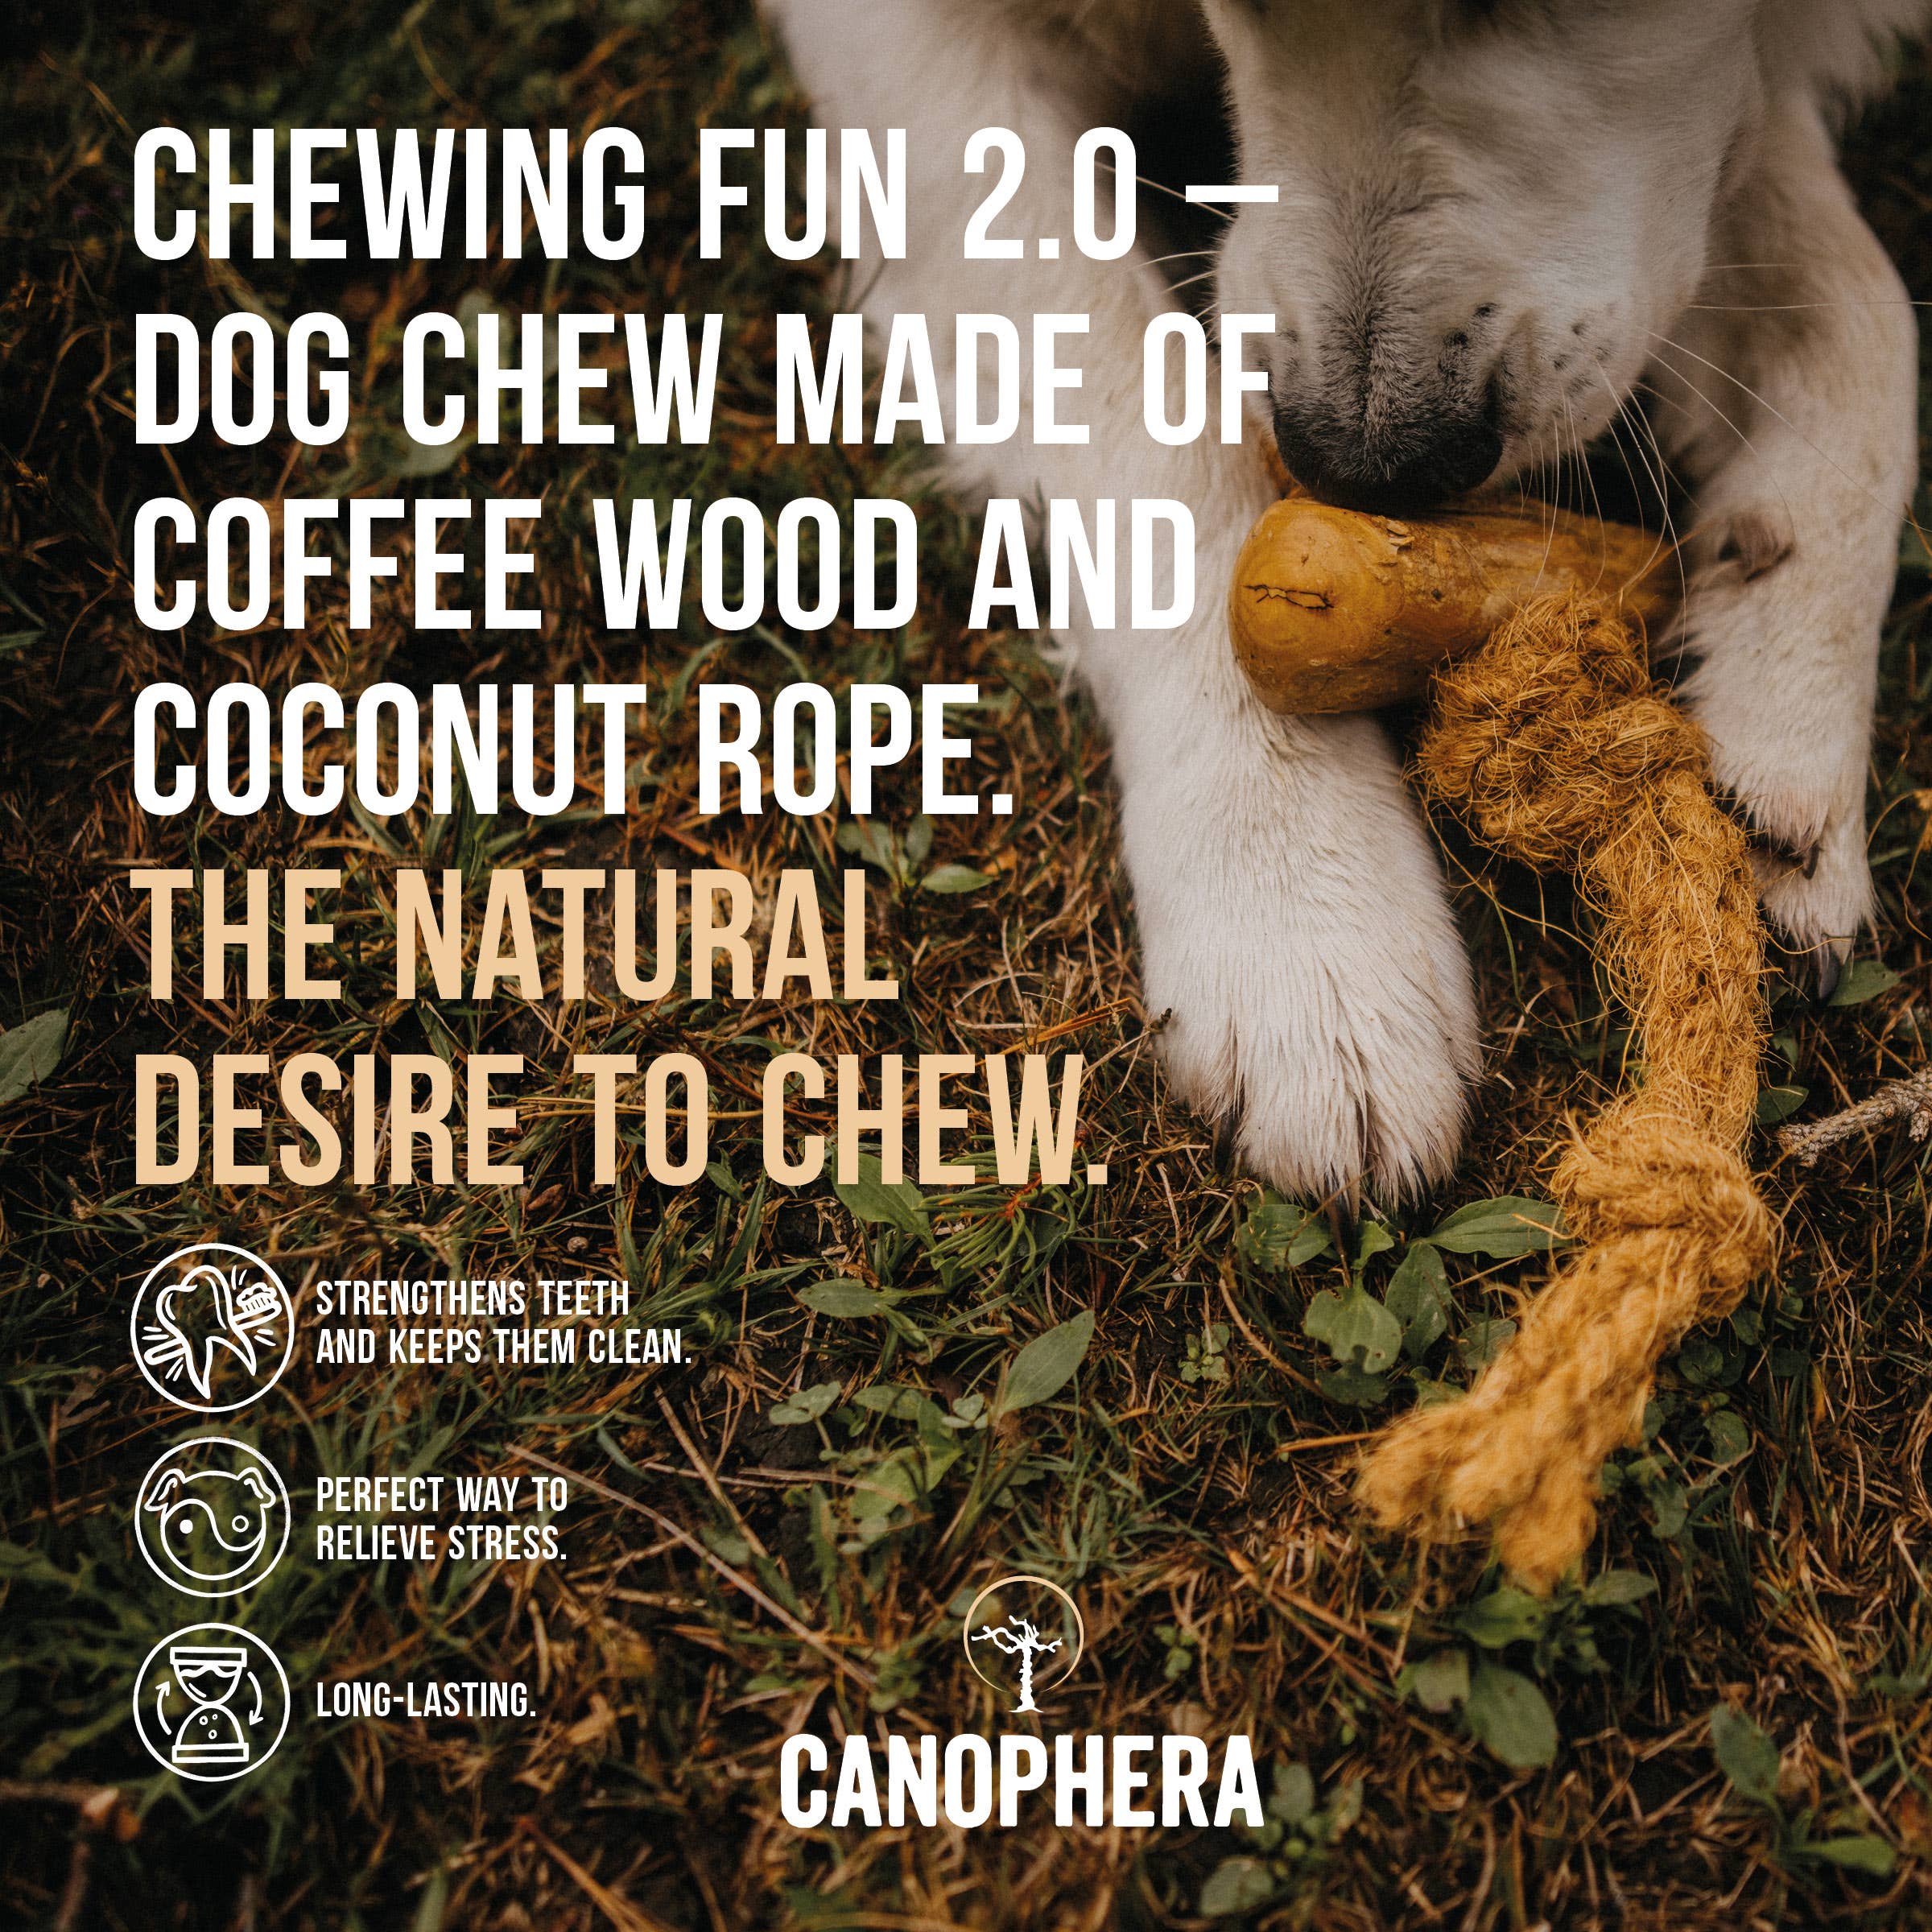 CANOPHERA LLC - Dog Chew Made of Coffee Wood and Coconut Rope.: Large